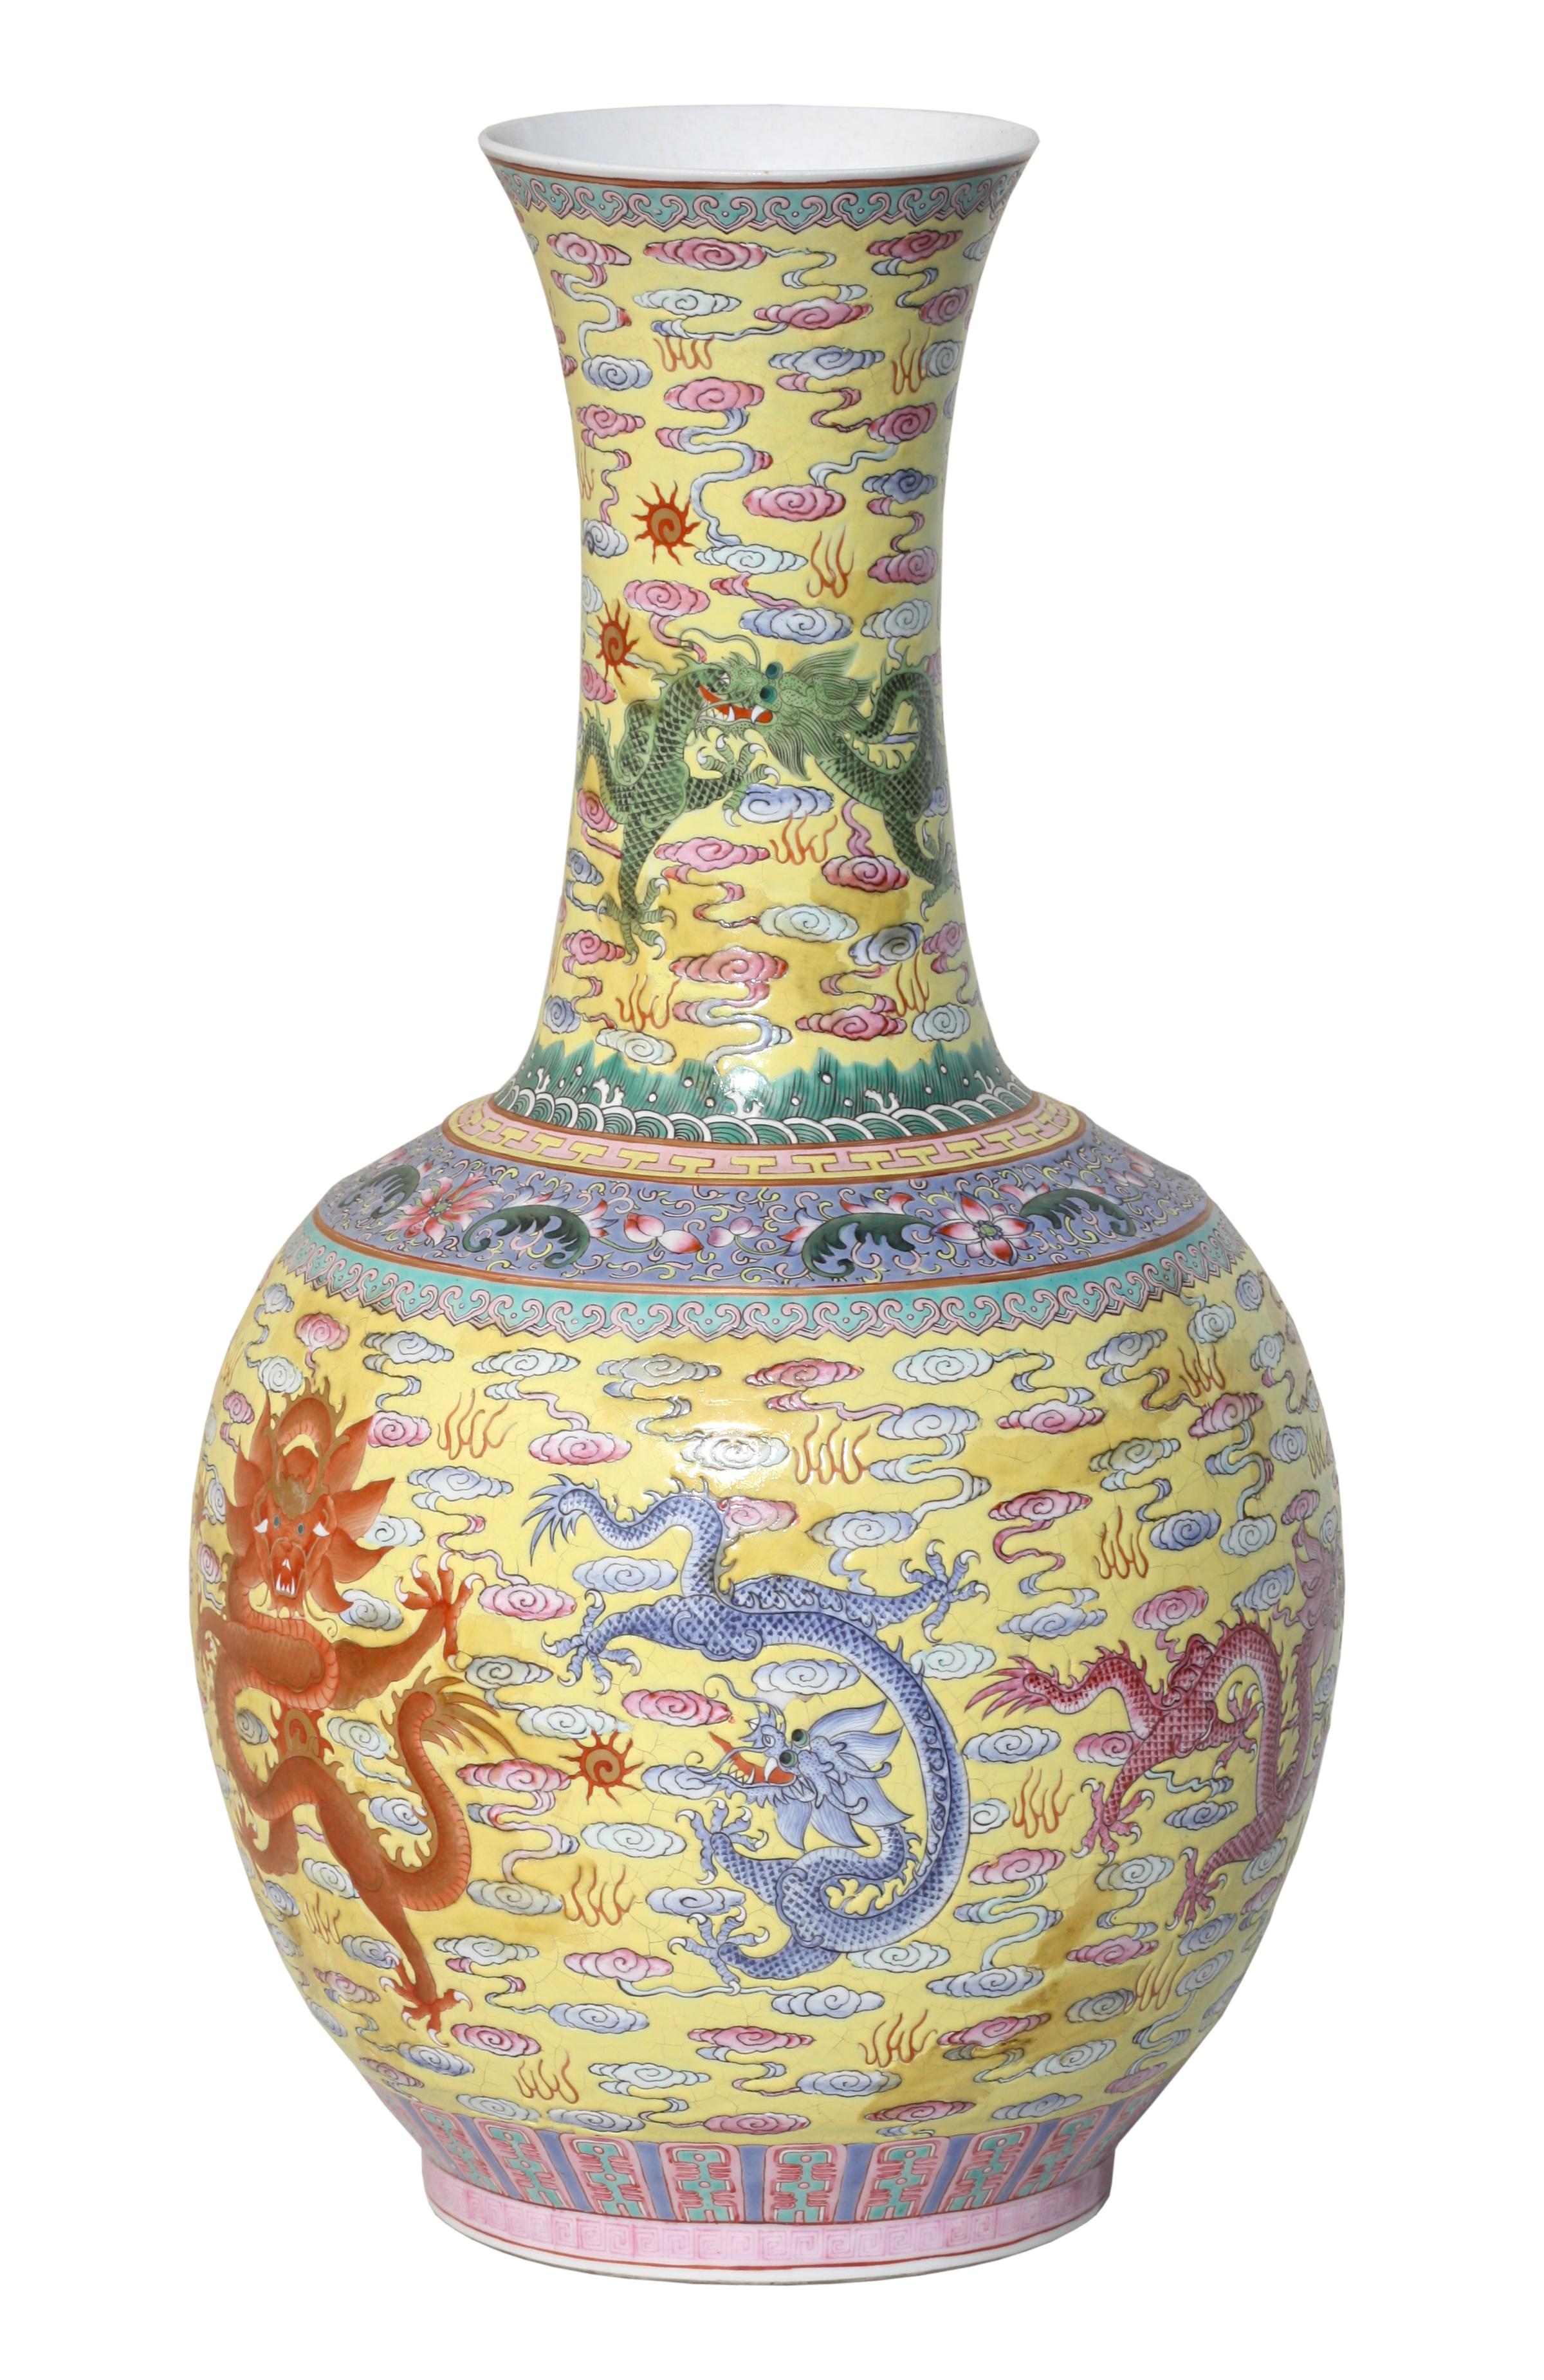 A Pair of Chinese Qing Style Famille Jaune Porcelain Vases, baluster-form vases with wide mouths, painted with dragons at various pursuits amongst clouds with yellow and pink ground
Height 17.5 in. (44.45 cm.)
Base 5.62 in. (14.28 cm.) 
30 in.